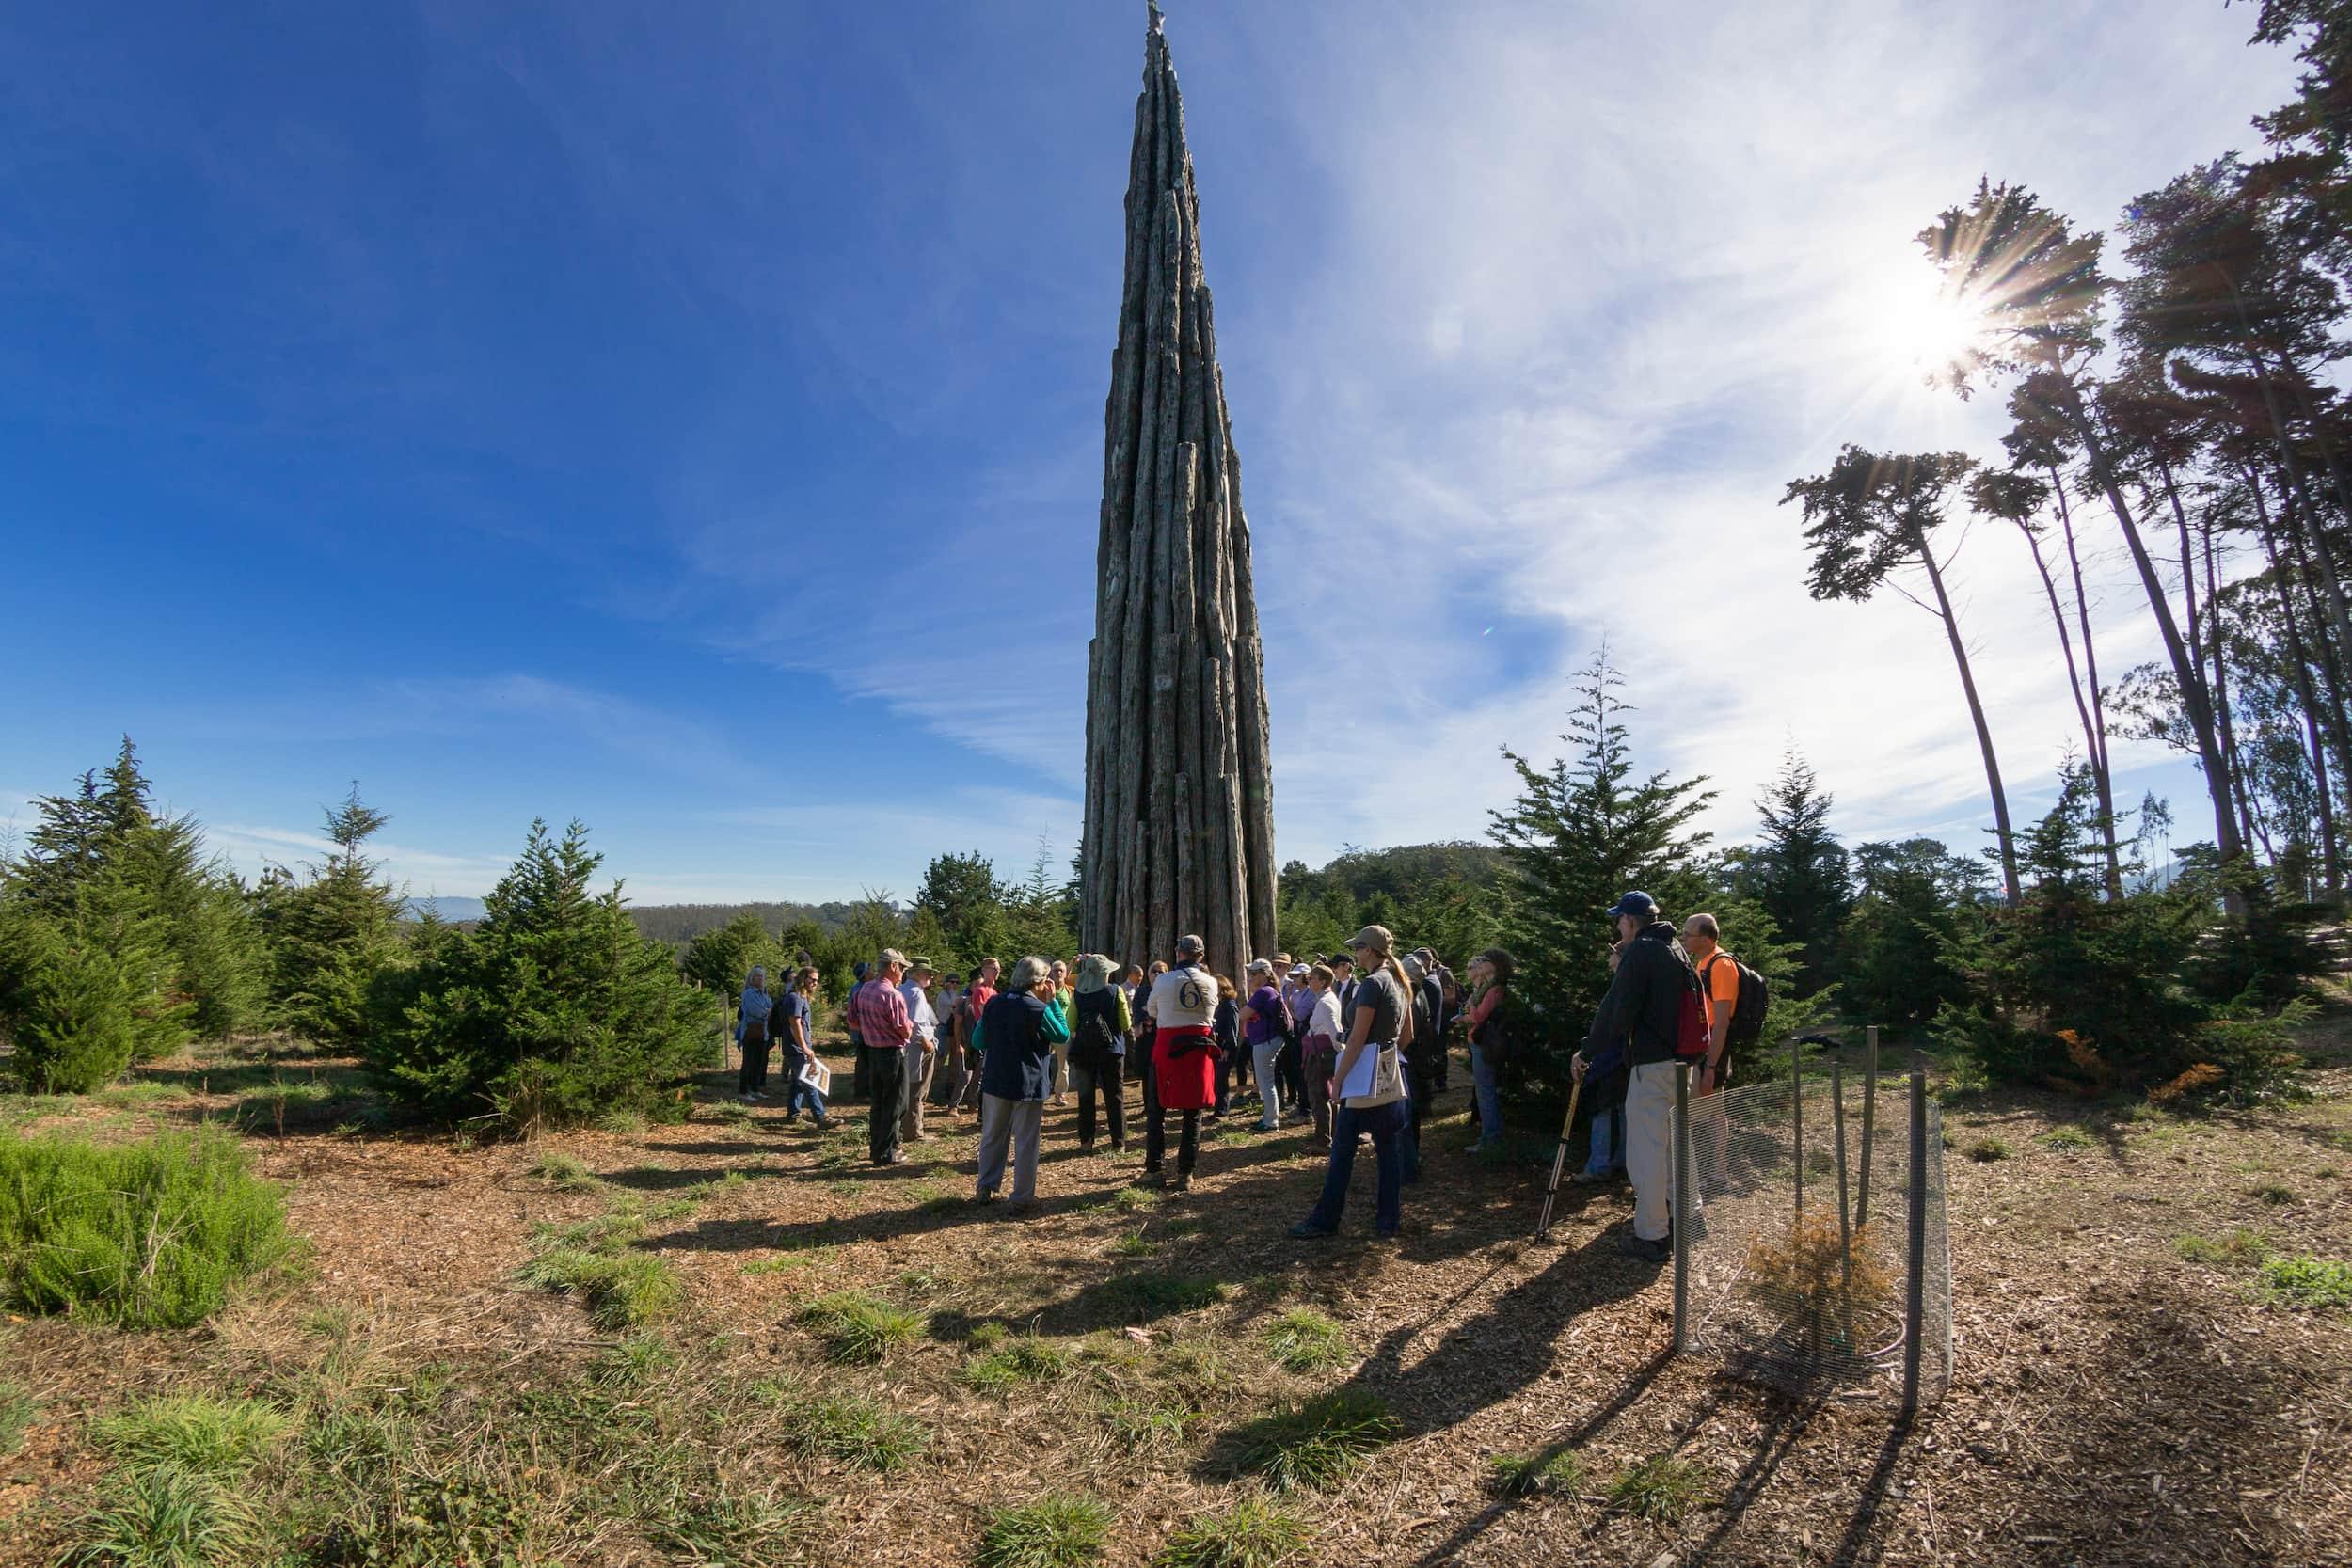 Andy Goldsworthy’s Spire in the Presidio of San Francisco, with a crowd of people standing at its base. Photo by Charity Vargas.